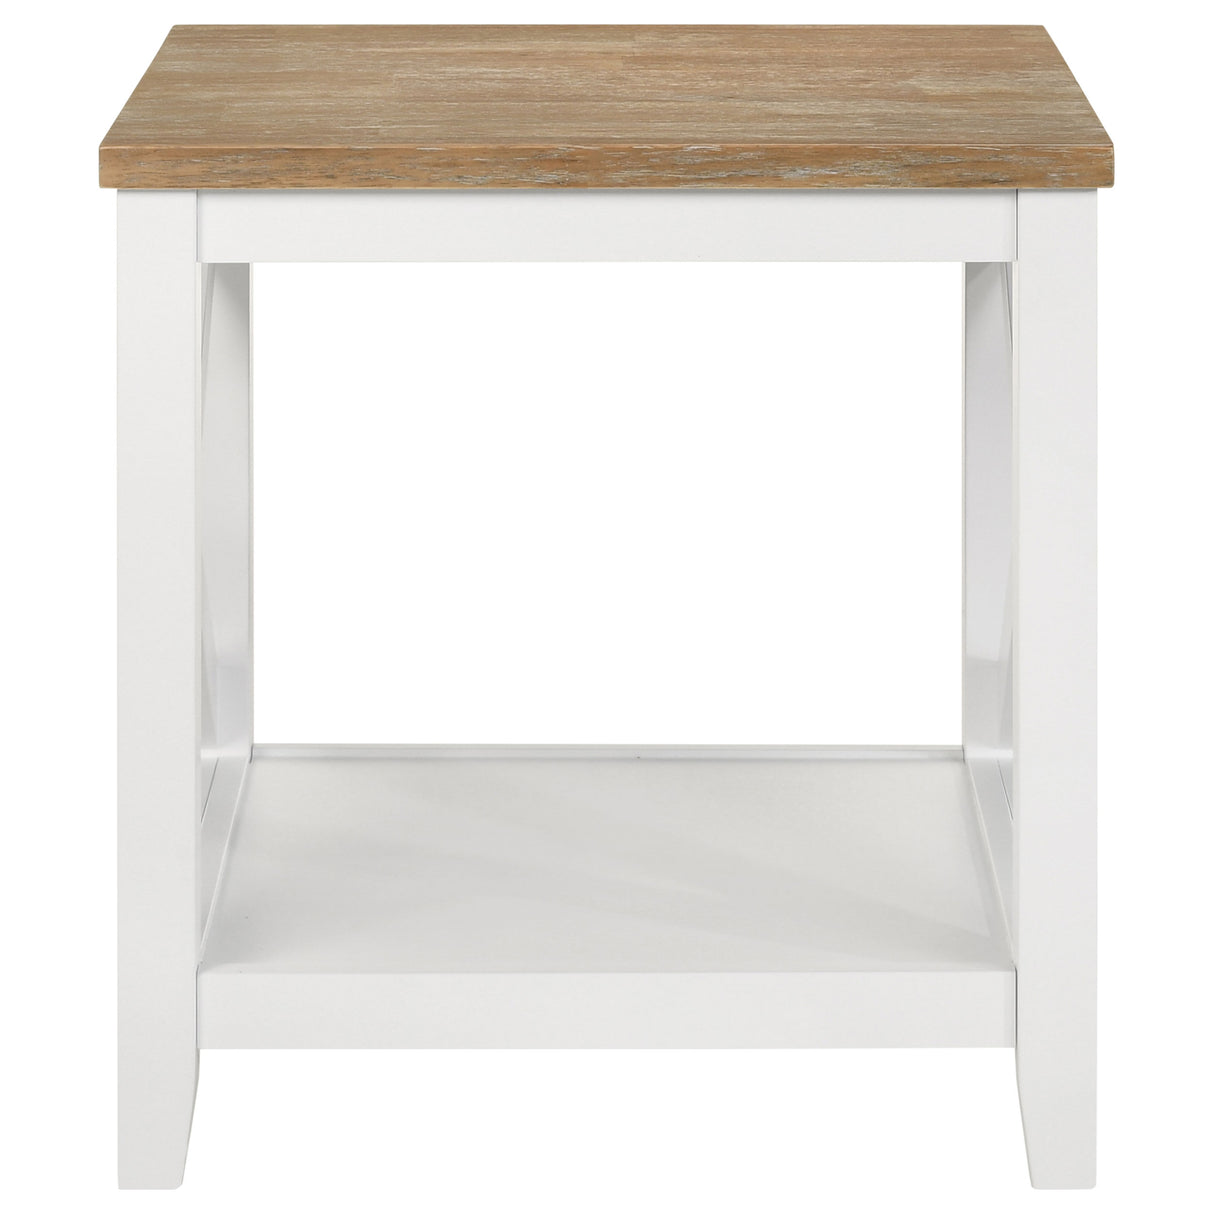 End Table  - Maisy Square Wooden End Table With Shelf Brown and White